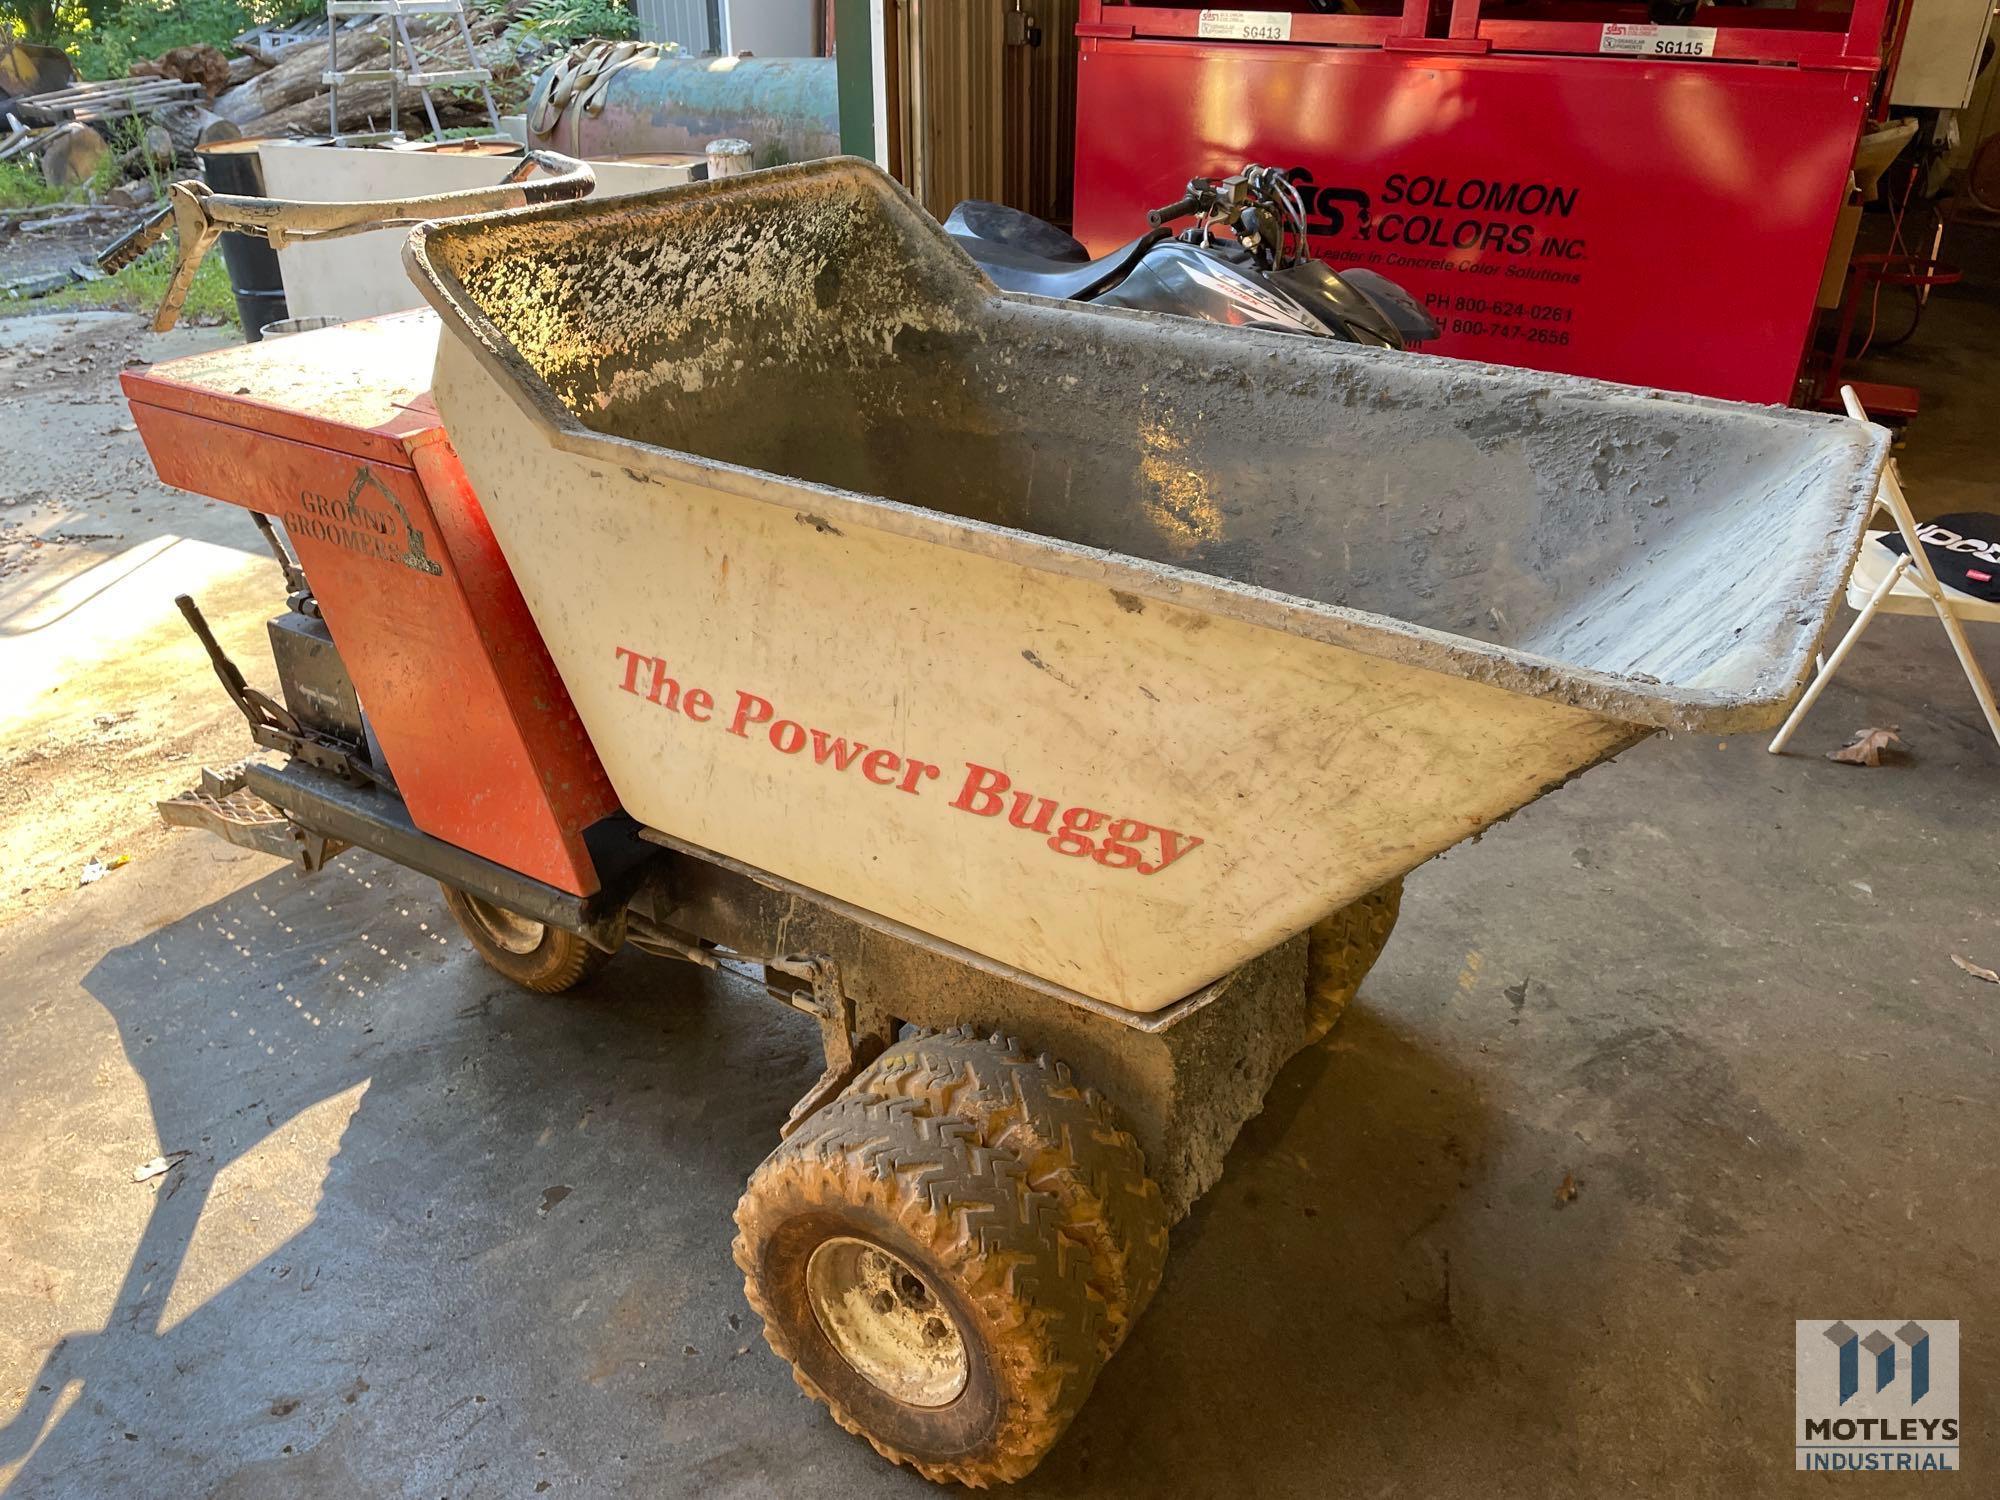 The Power Buggy